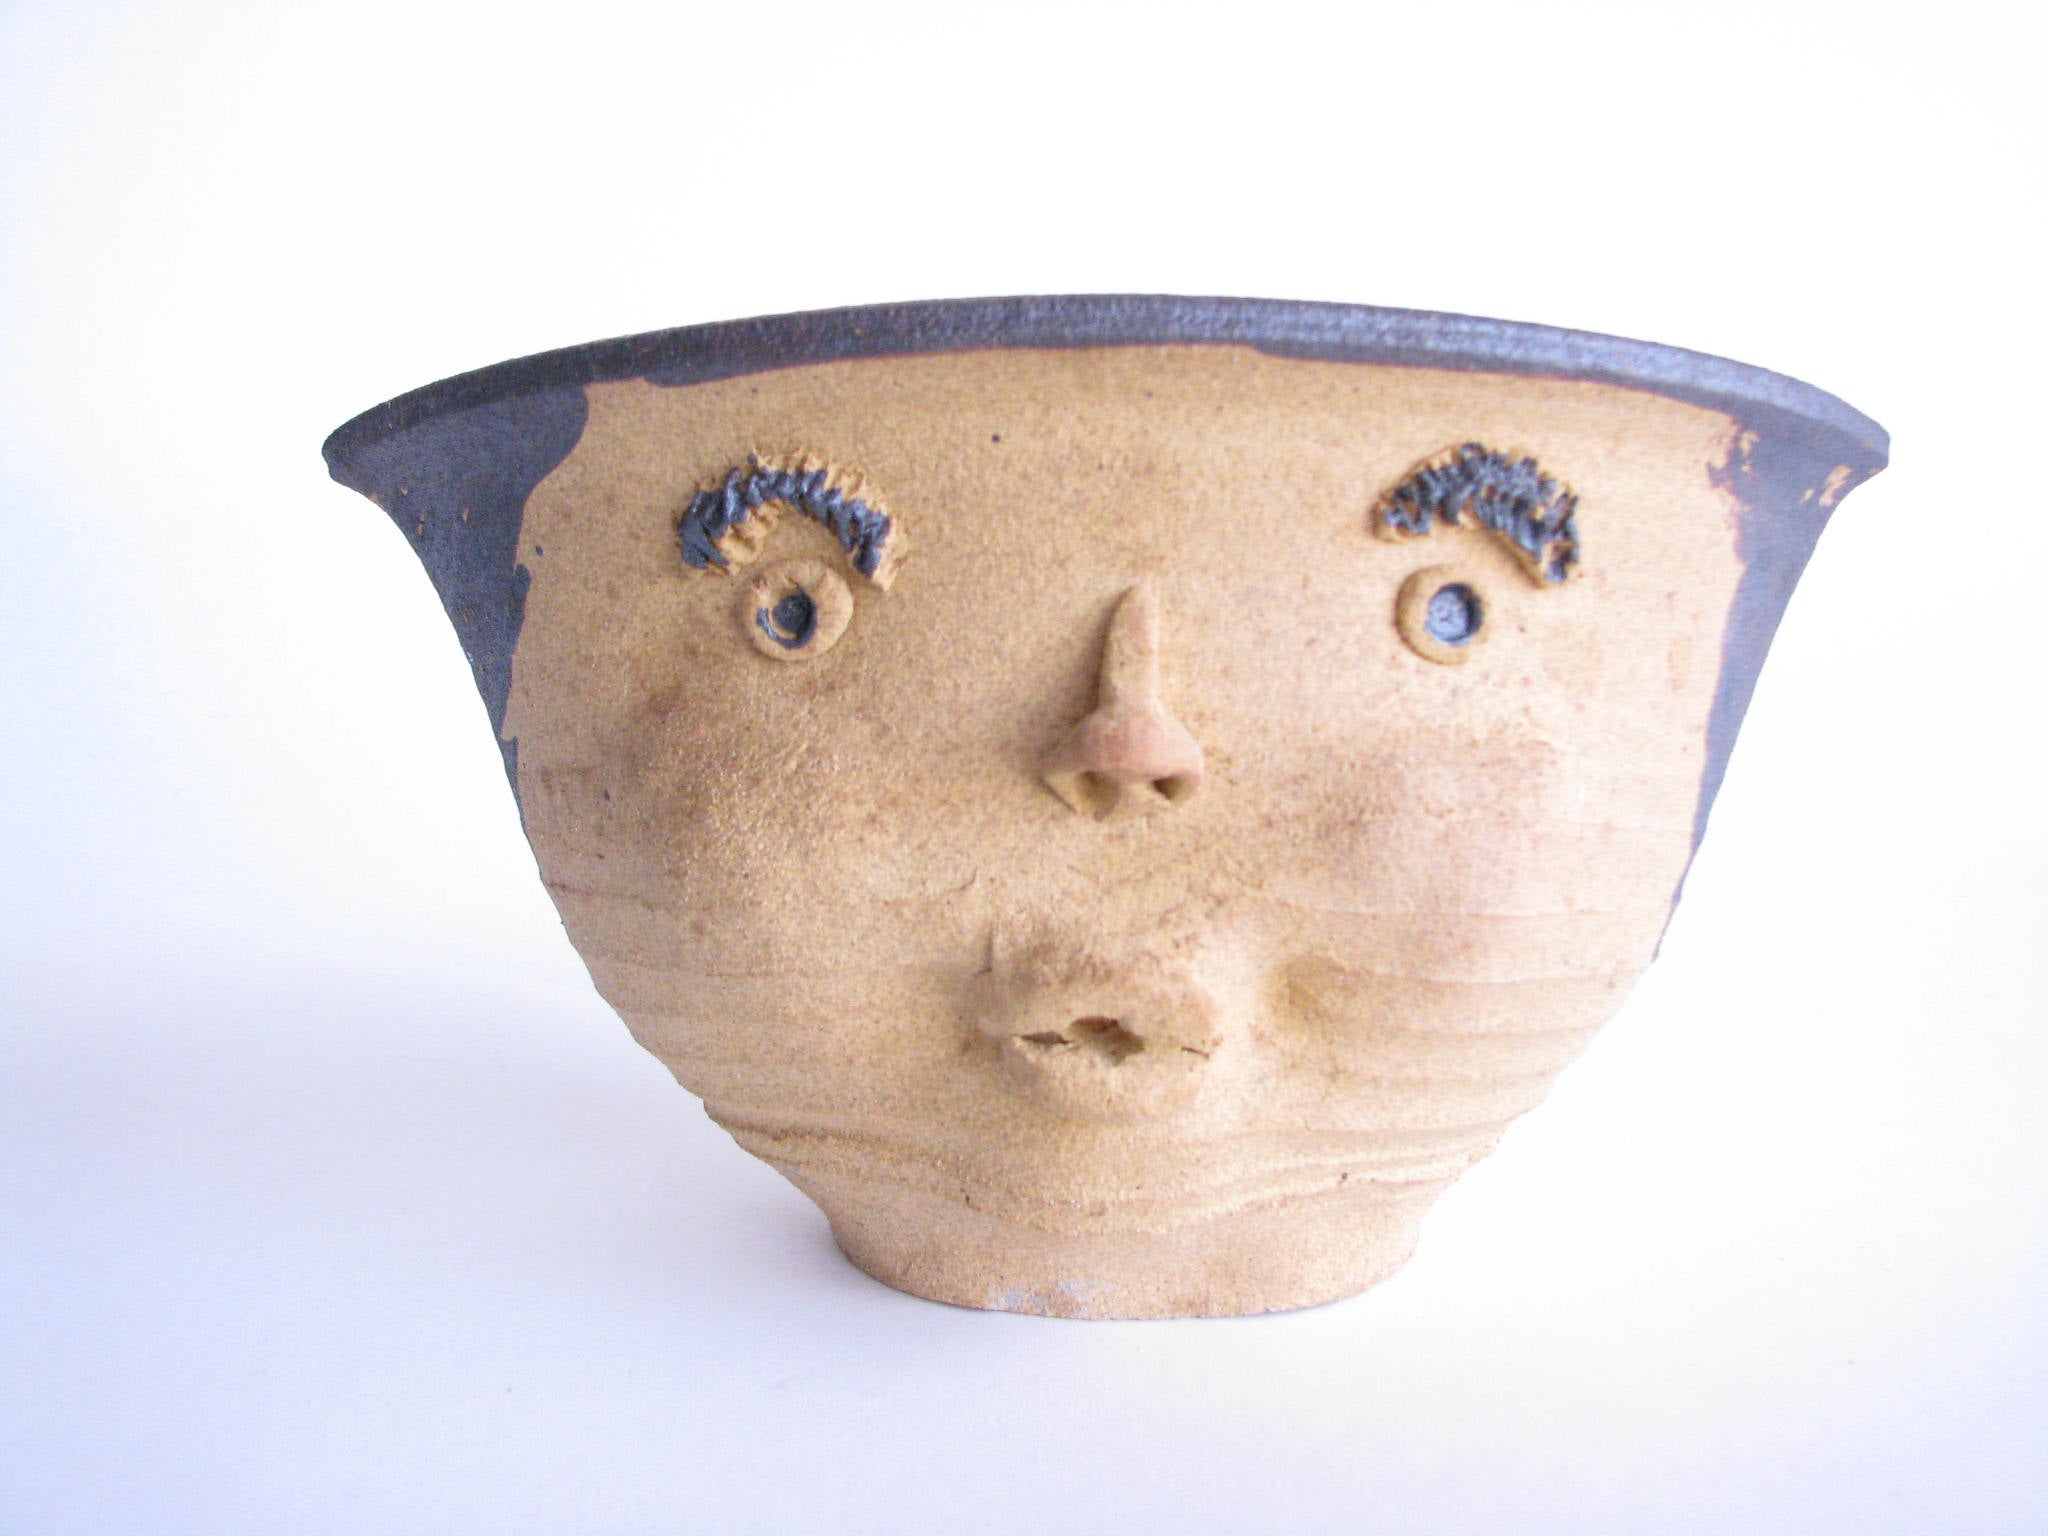 edgebrookhouse - Vintage Sandstone or Clay Pottery Head / Face Shaped Planter